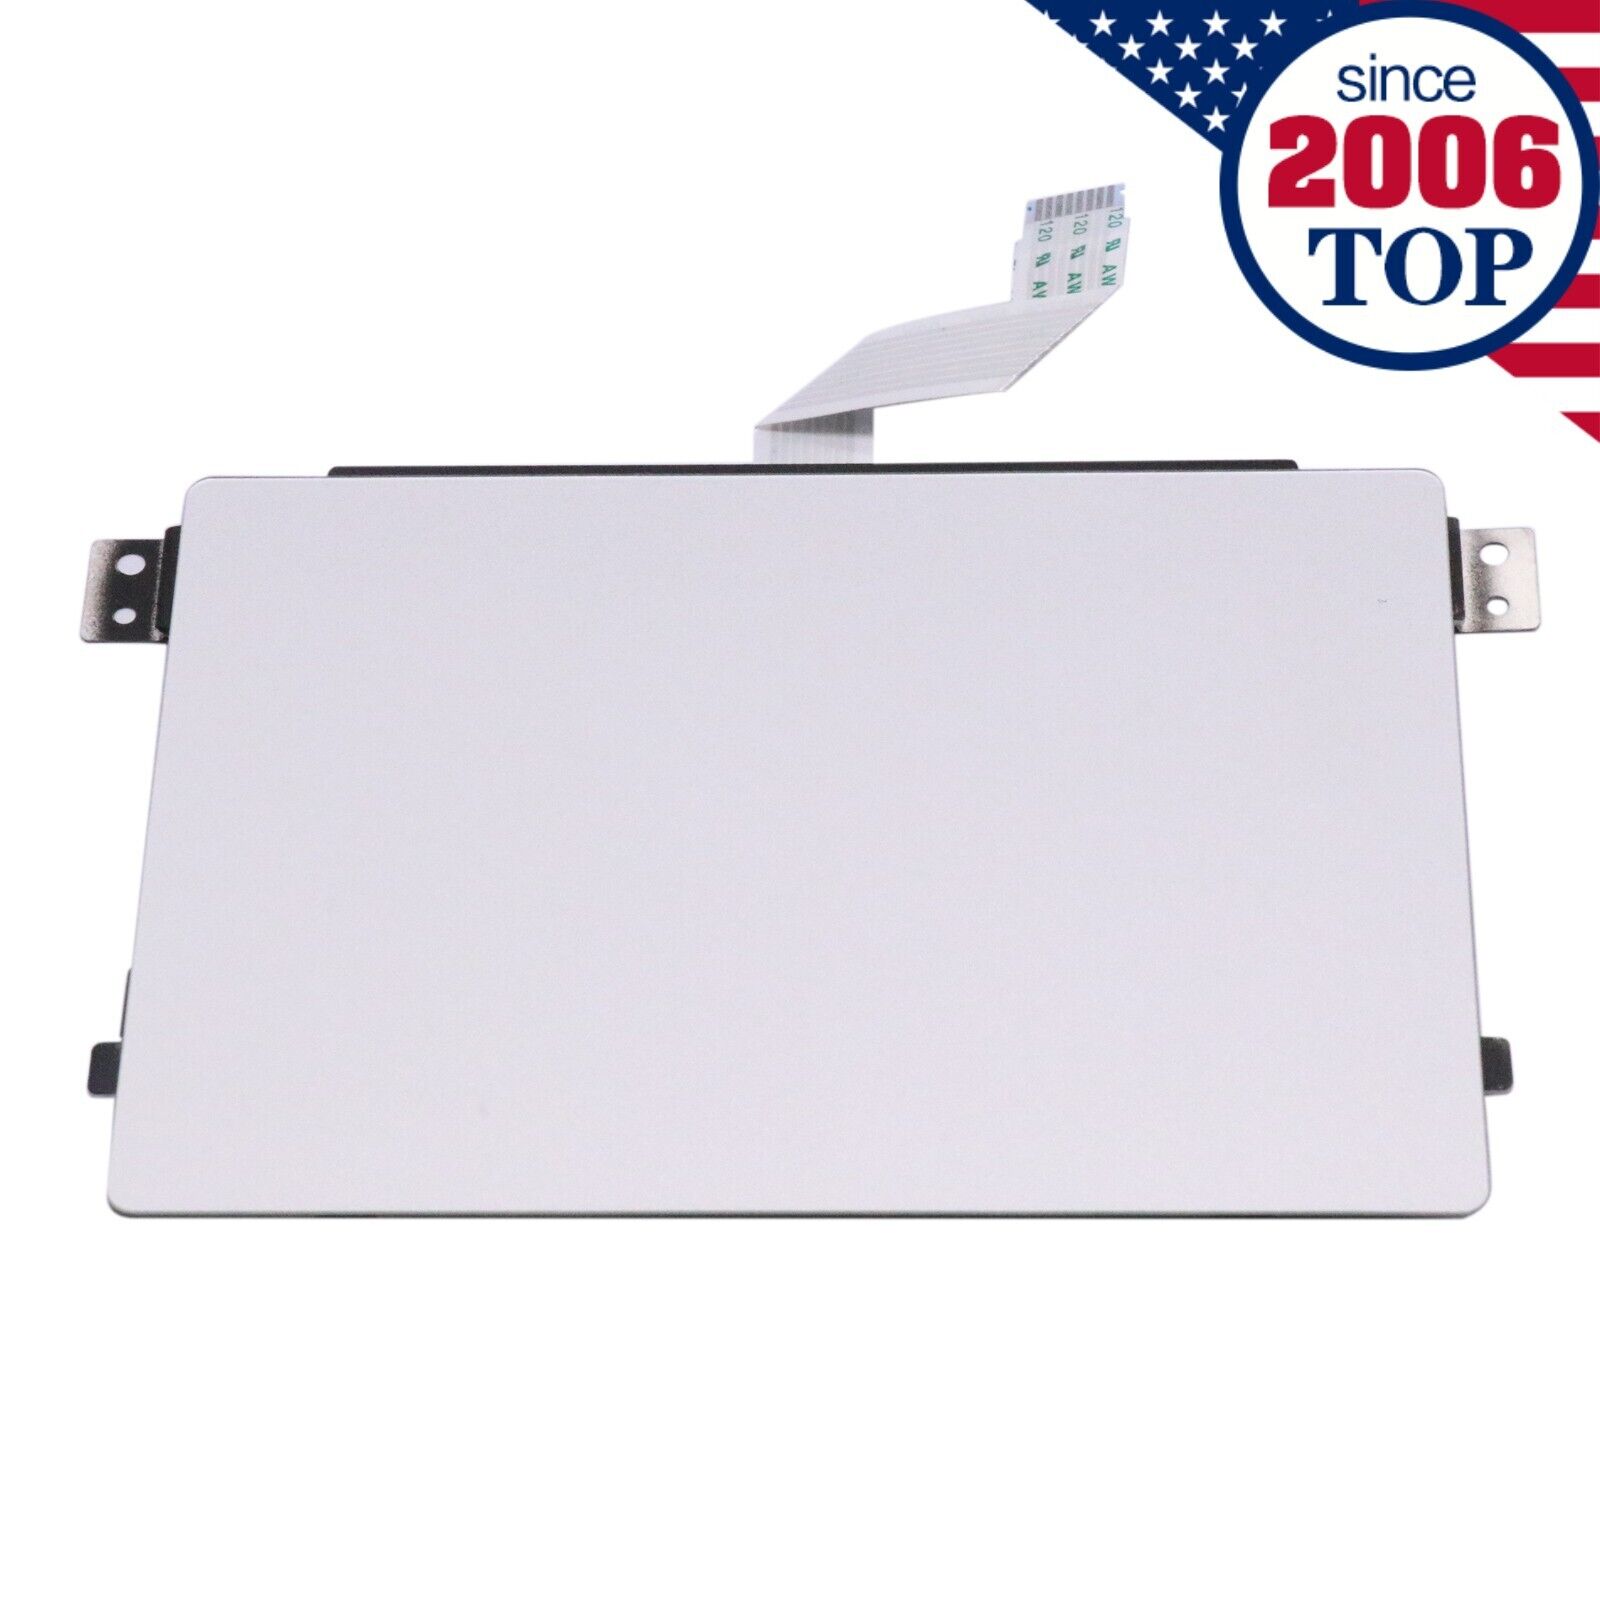 Silver Touchpad Module for Dell inspiron 15 7500 7501 7506 5501 5502 5505 0JTTWY